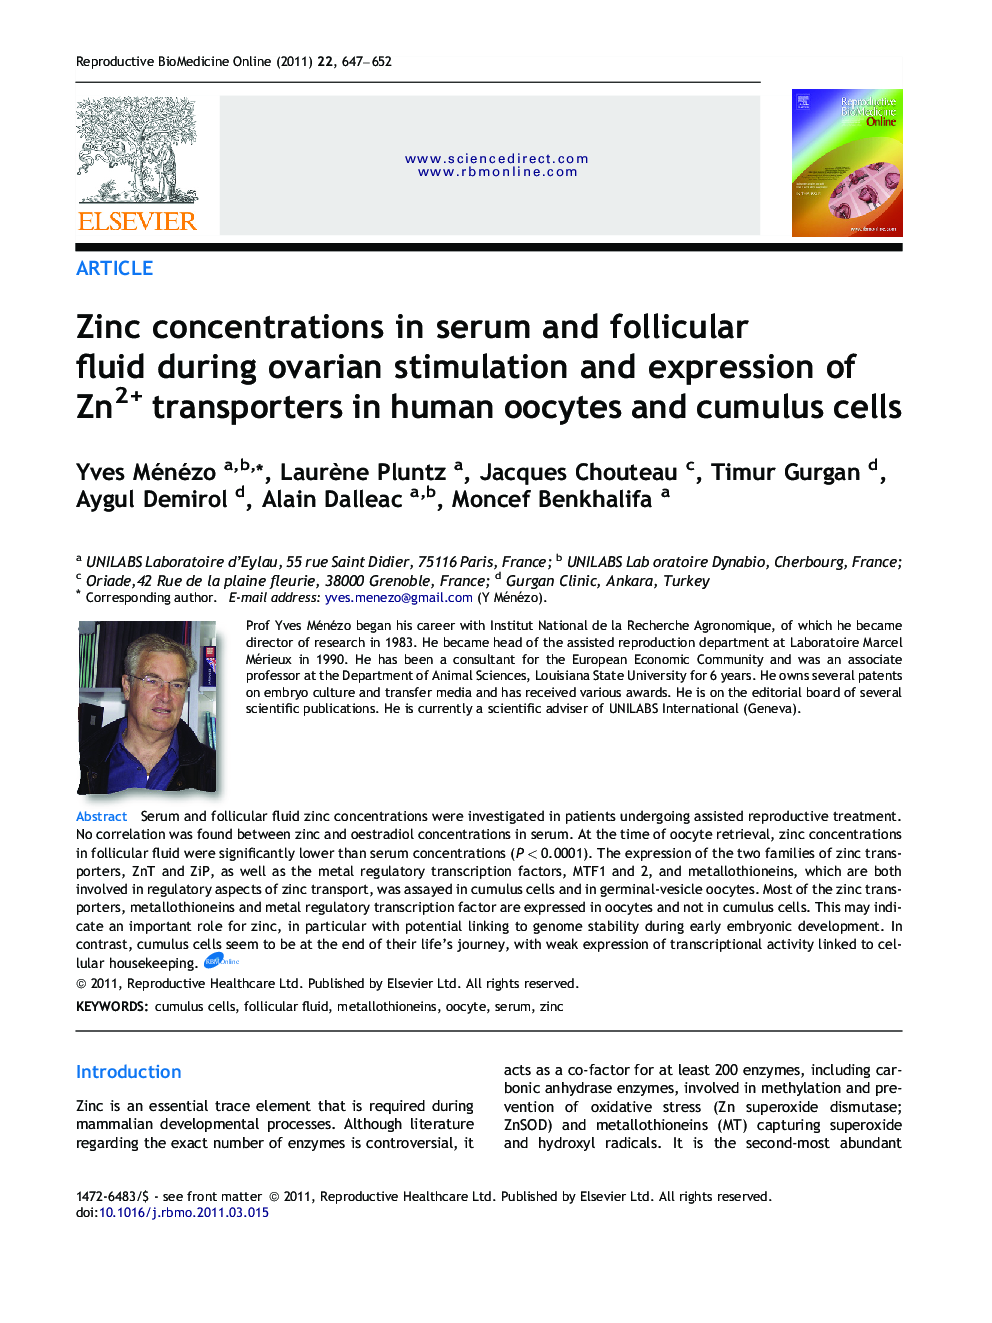 Zinc concentrations in serum and follicular fluid during ovarian stimulation and expression of Zn2+ transporters in human oocytes and cumulus cells 